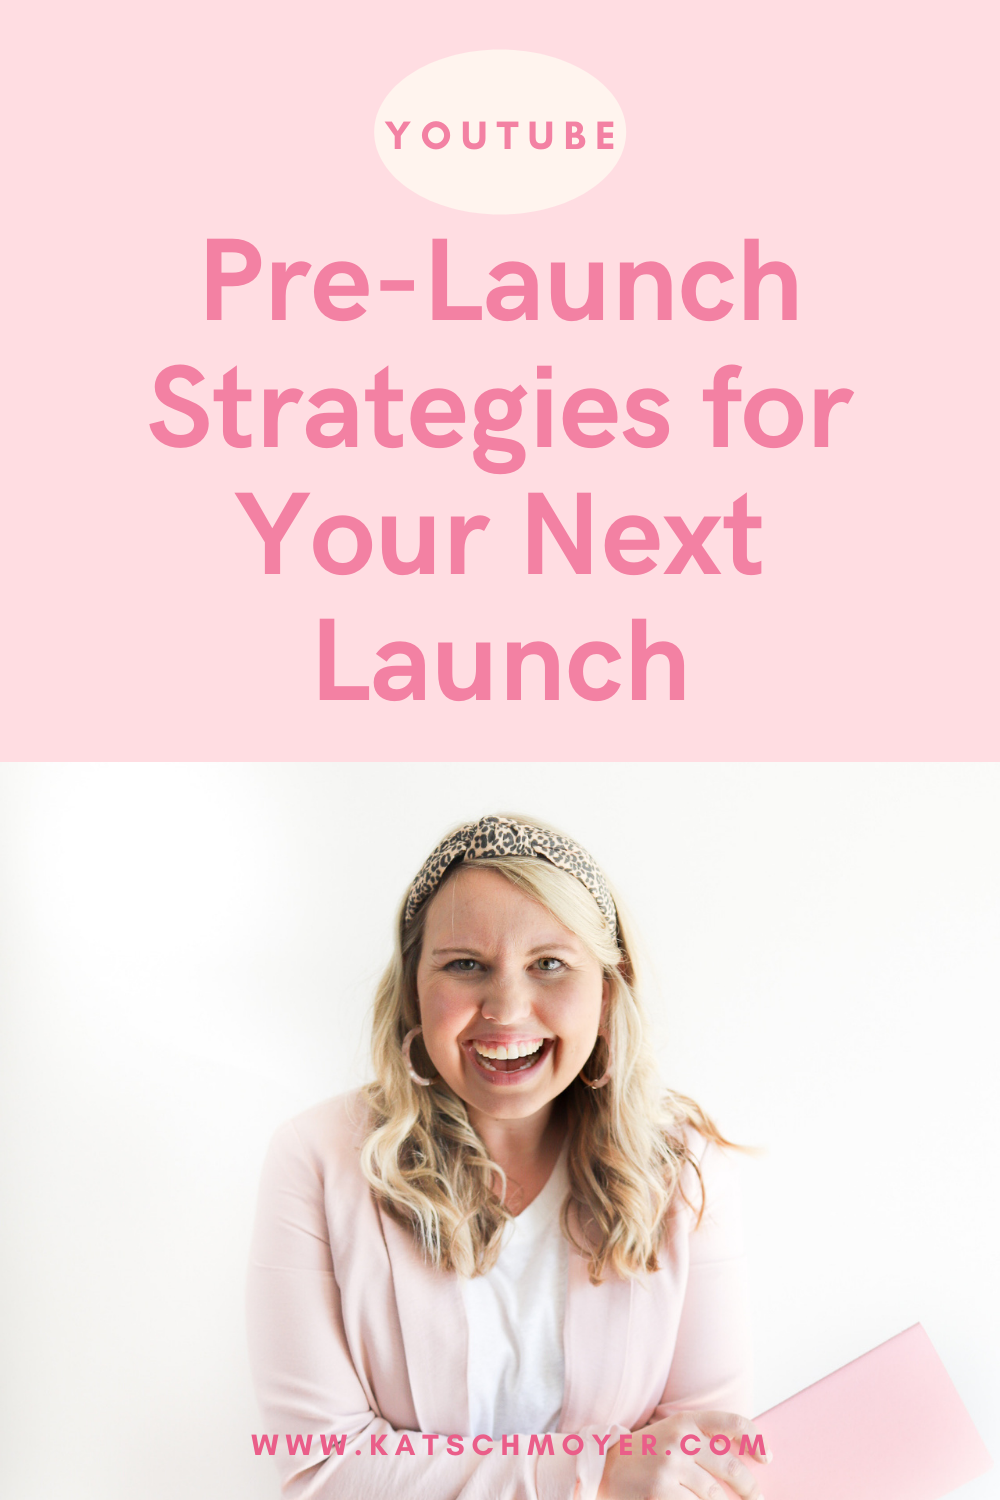 Pre-Launch Strategies for Your Next Launch